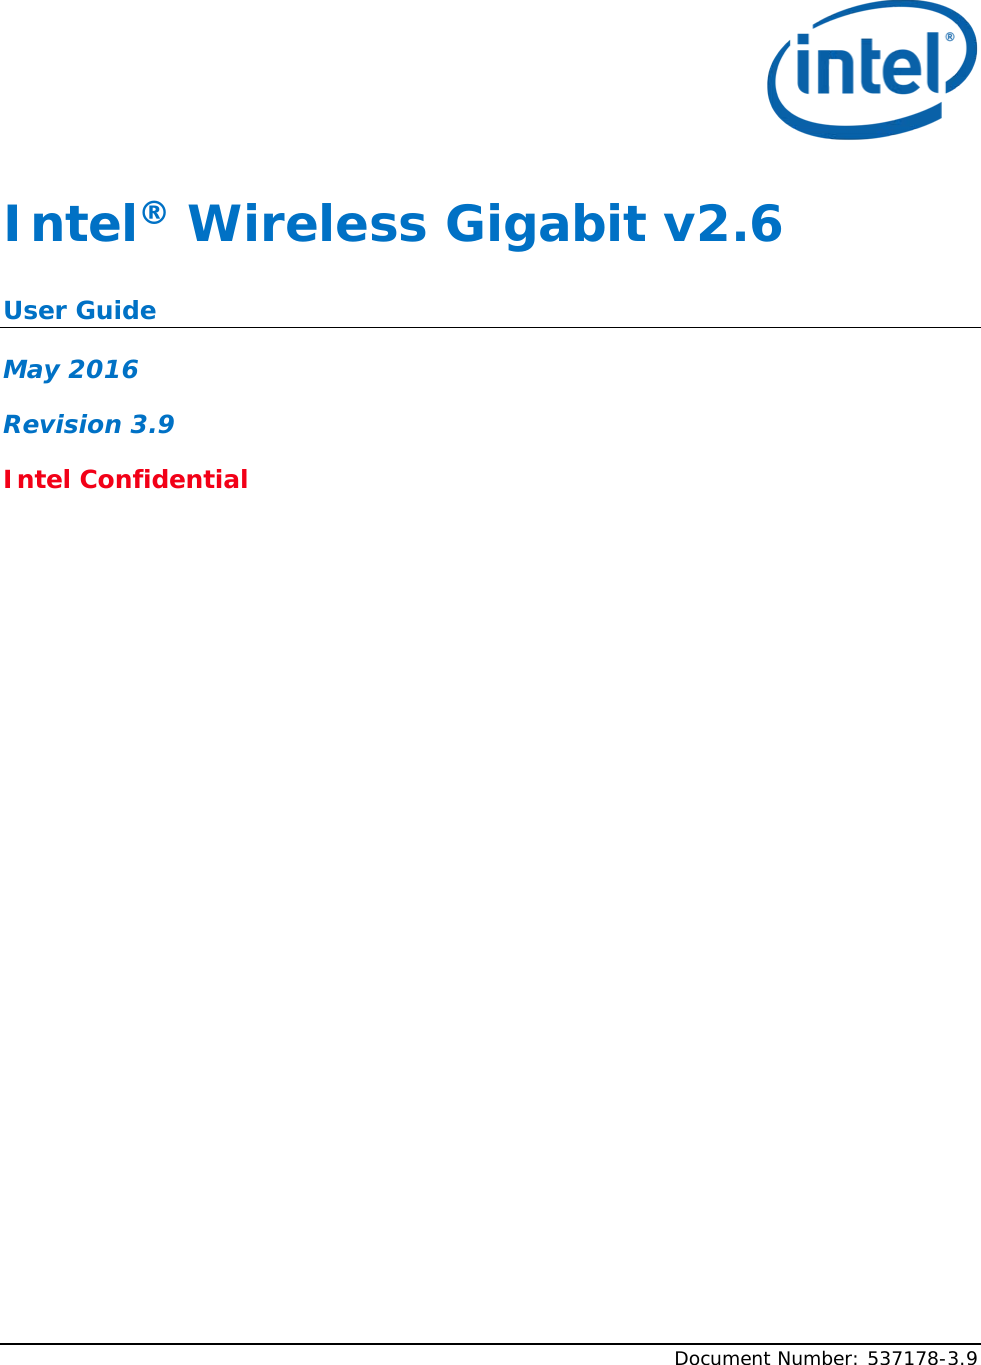        Document Number: 537178-3.9 Intel® Wireless Gigabit v2.6 User Guide May 2016 Revision 3.9 Intel Confidential  